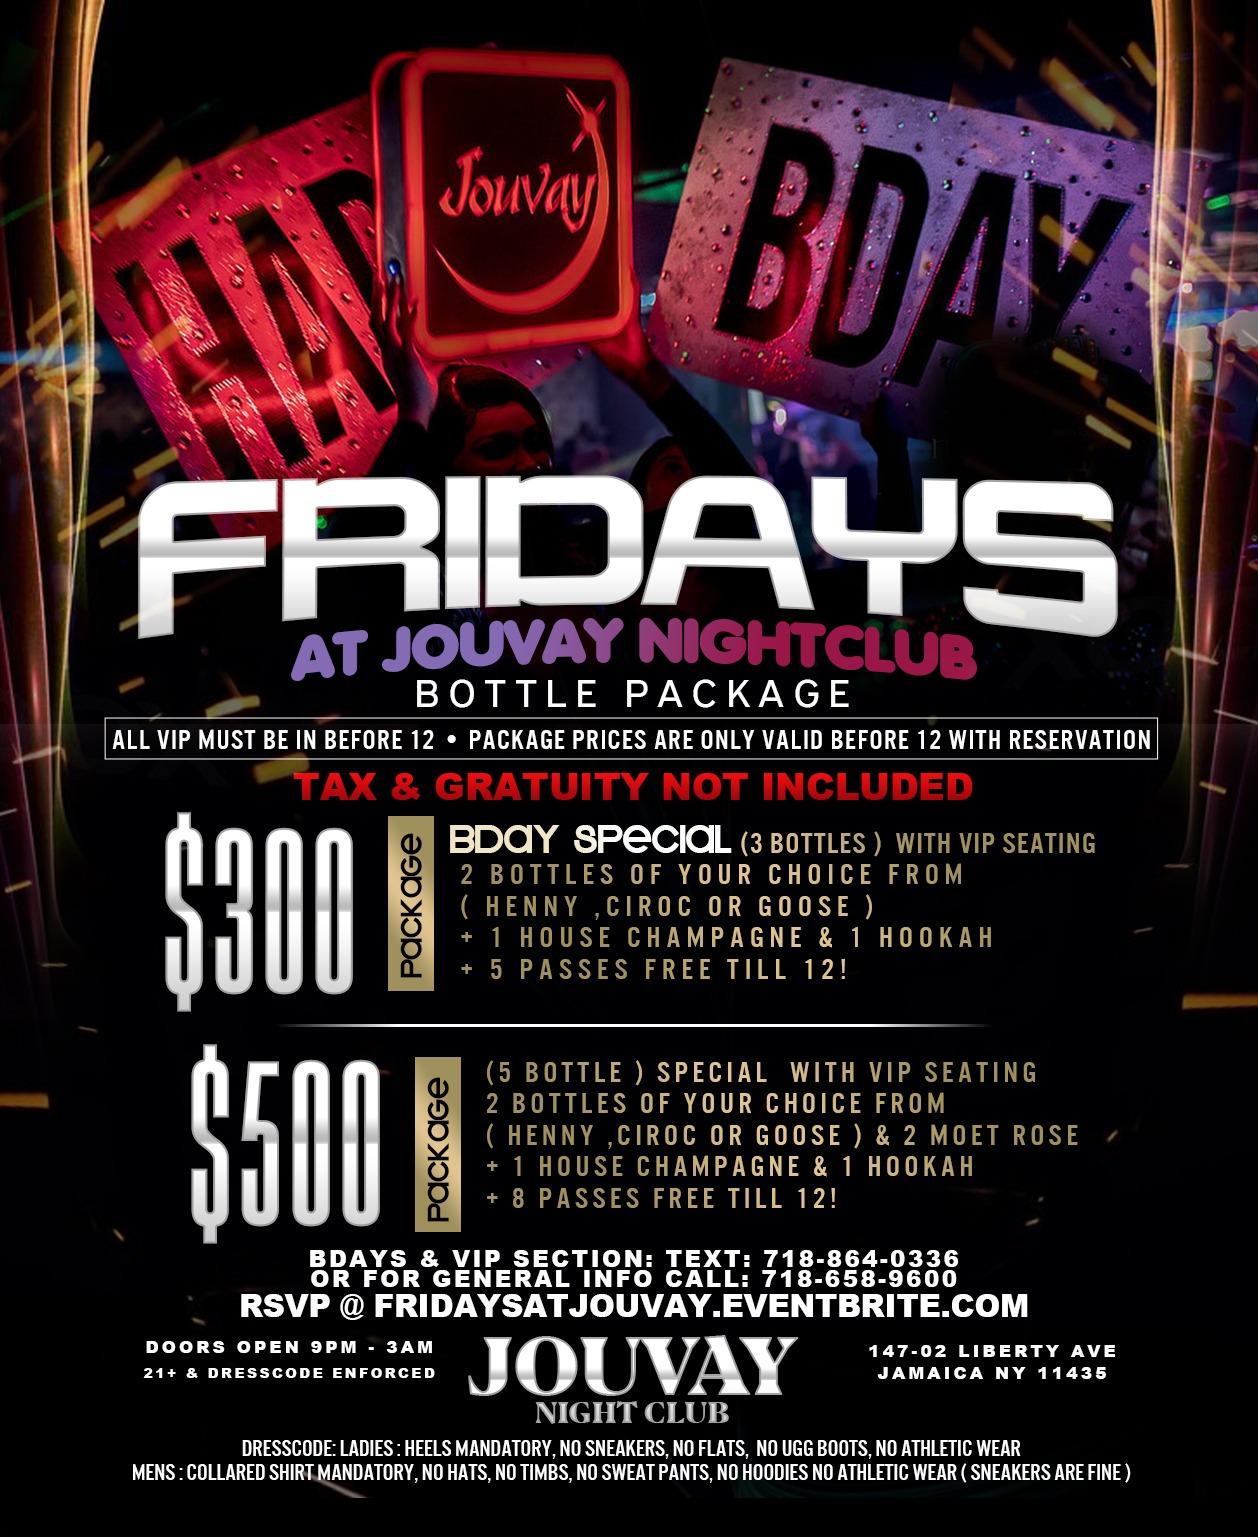 FUSION FRIDAYS AT JOUVAY NIGHTCLUB HOSTED BY #TEAMINNO